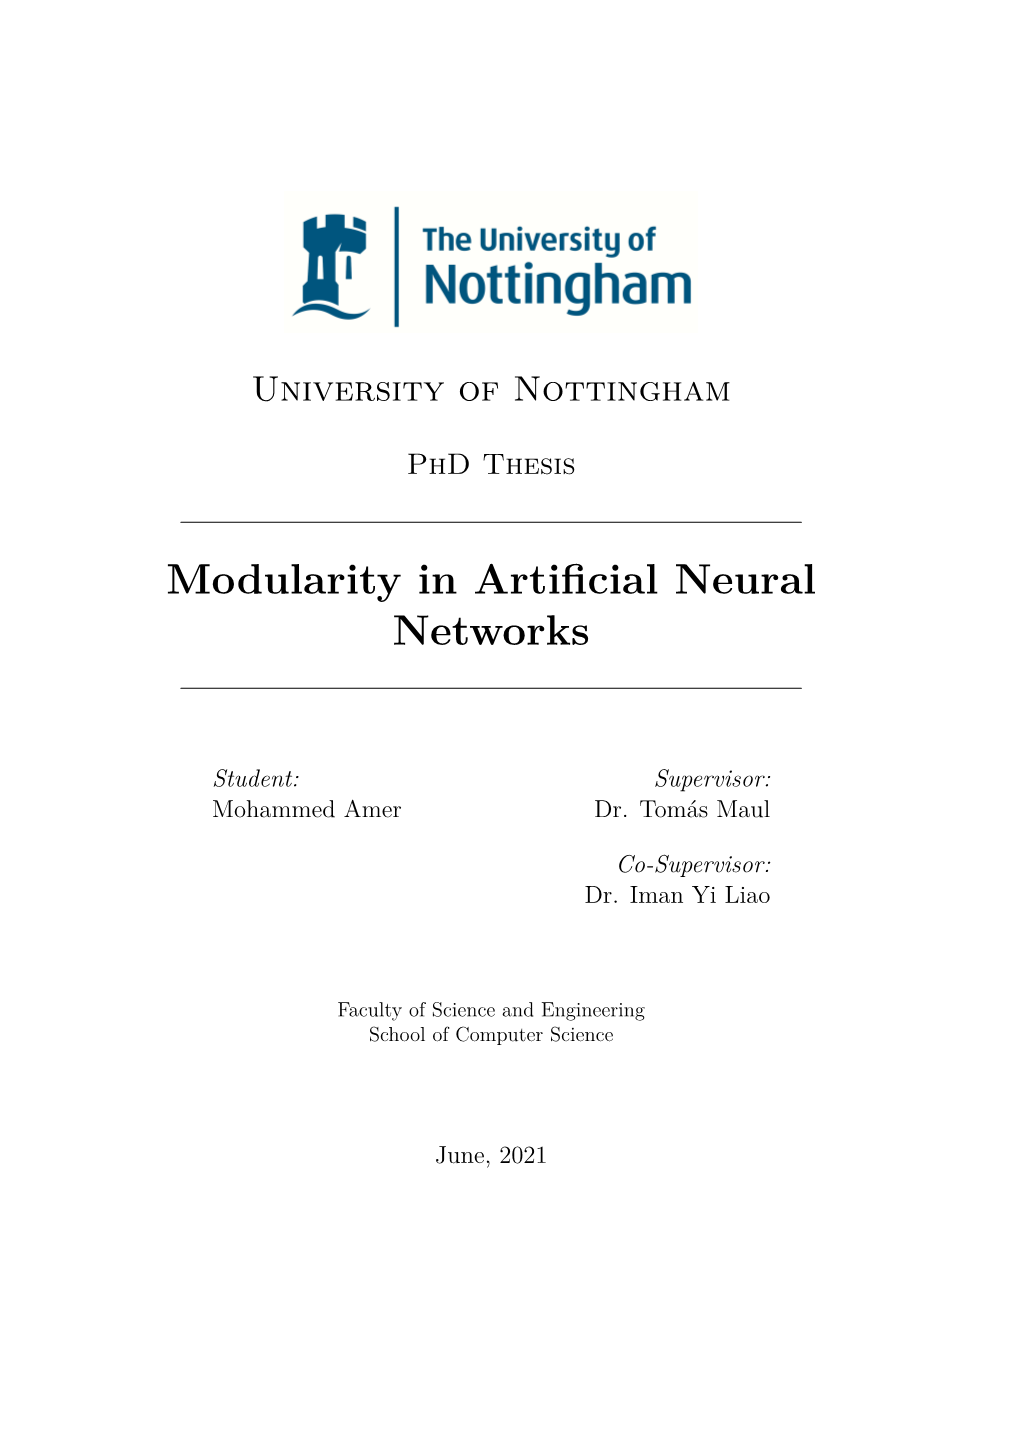 Modularity in Artificial Neural Networks